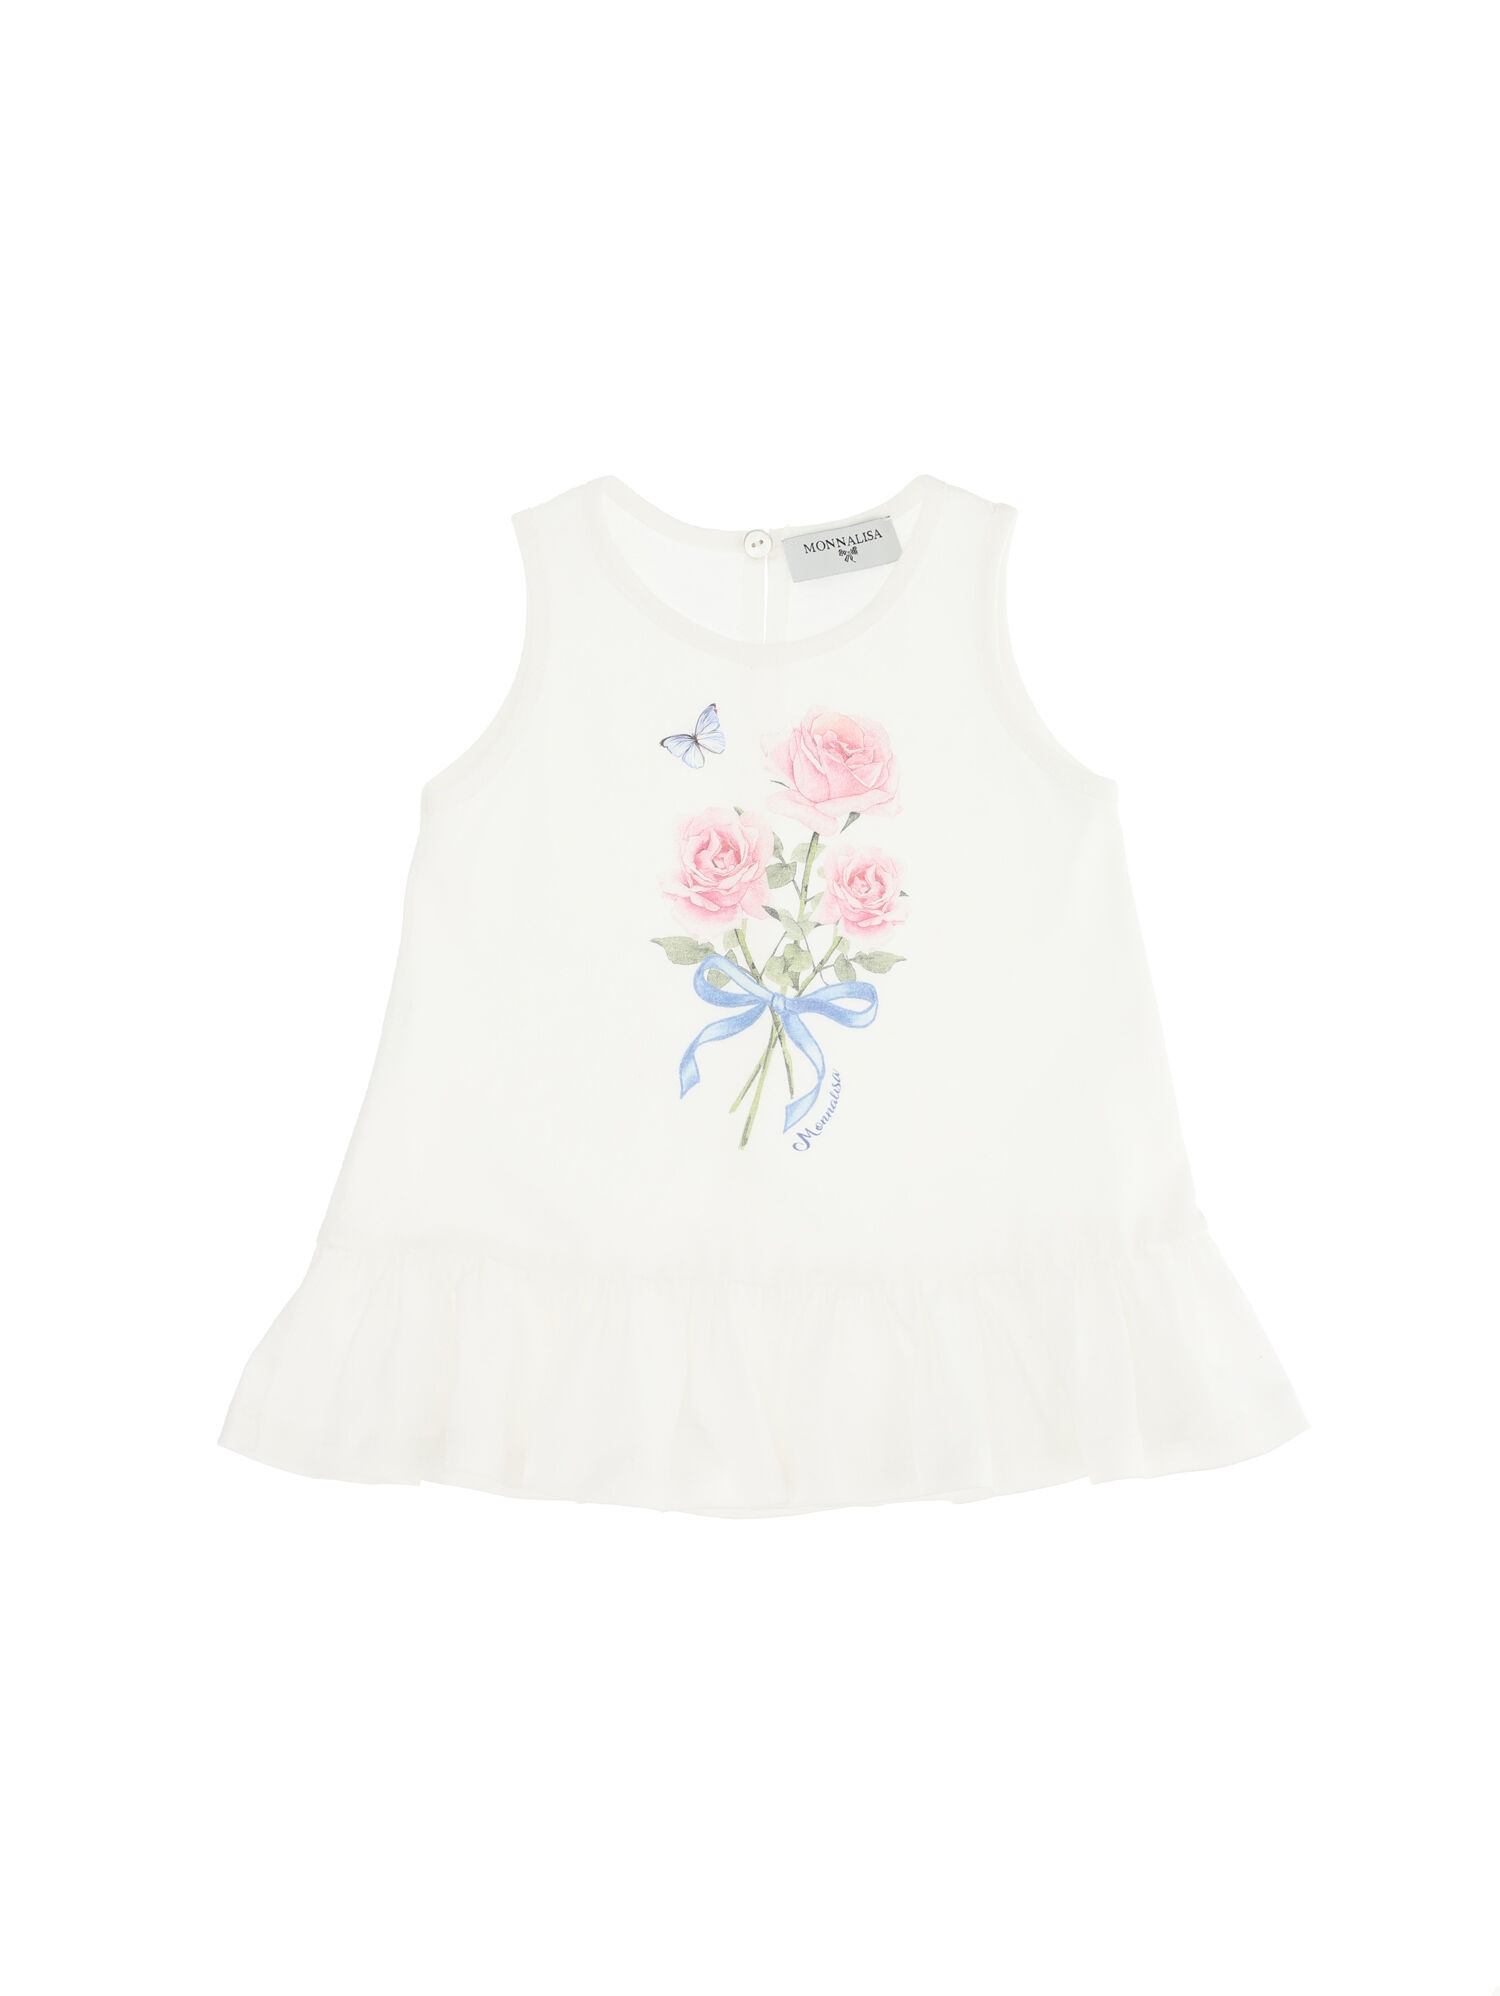 Rose jersey camisole with ruffles Monnalisa Girls Clothing Tops Camisoles 